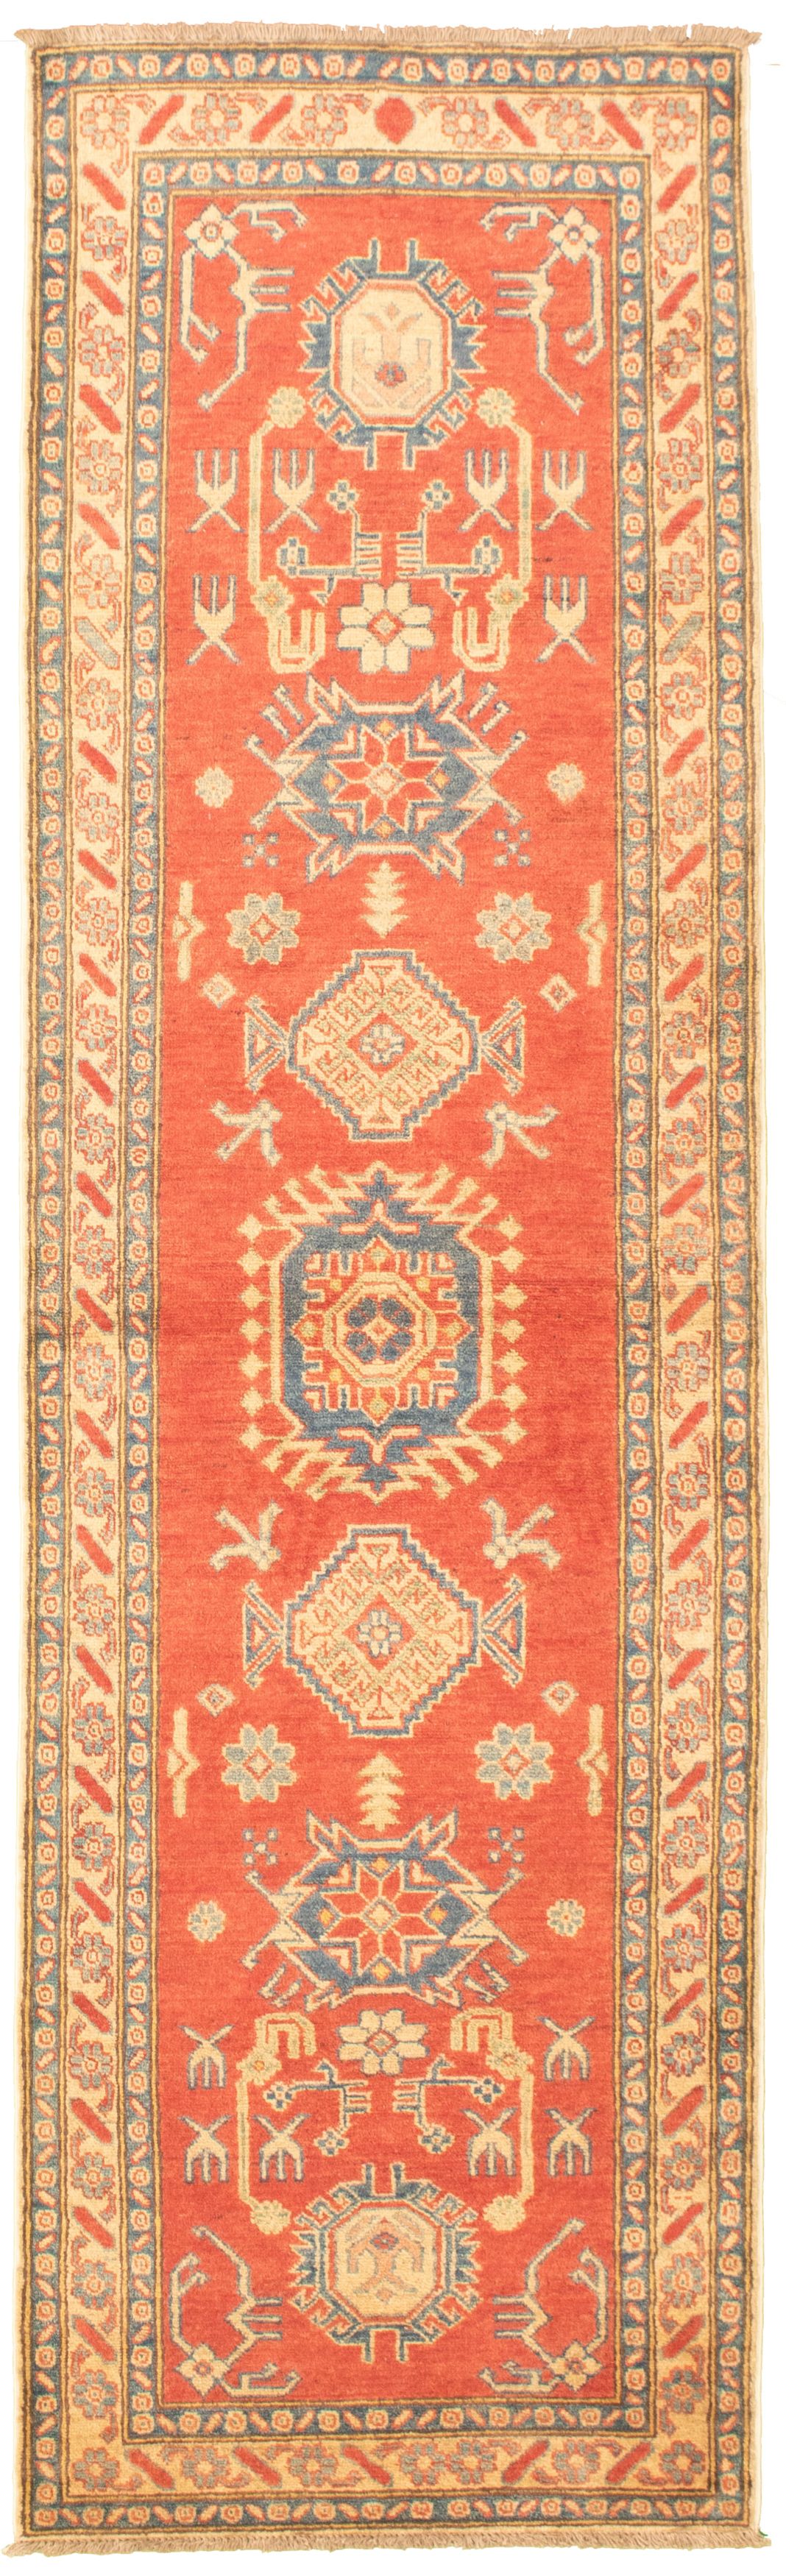 Hand-knotted Finest Gazni Red Wool Rug 2'9" x 9'9"  Size: 2'9" x 9'9"  